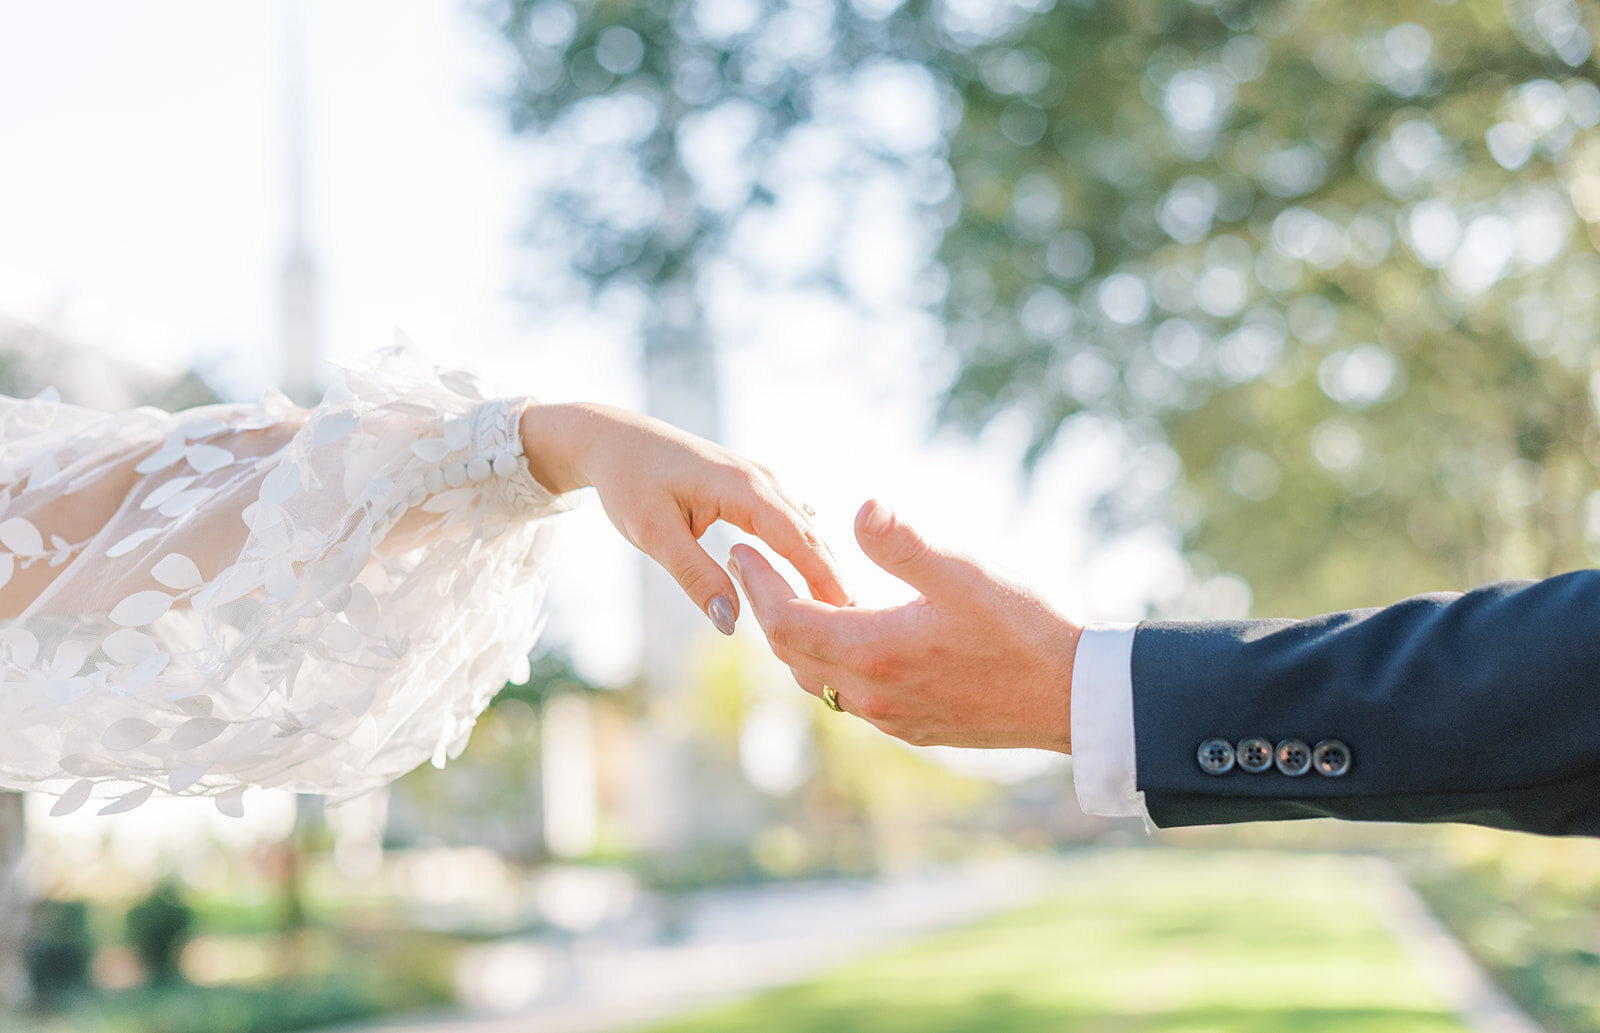 Portrait of a bride and groom’s hands in a blue suit and white lace wedding gown touching with trees in the background.